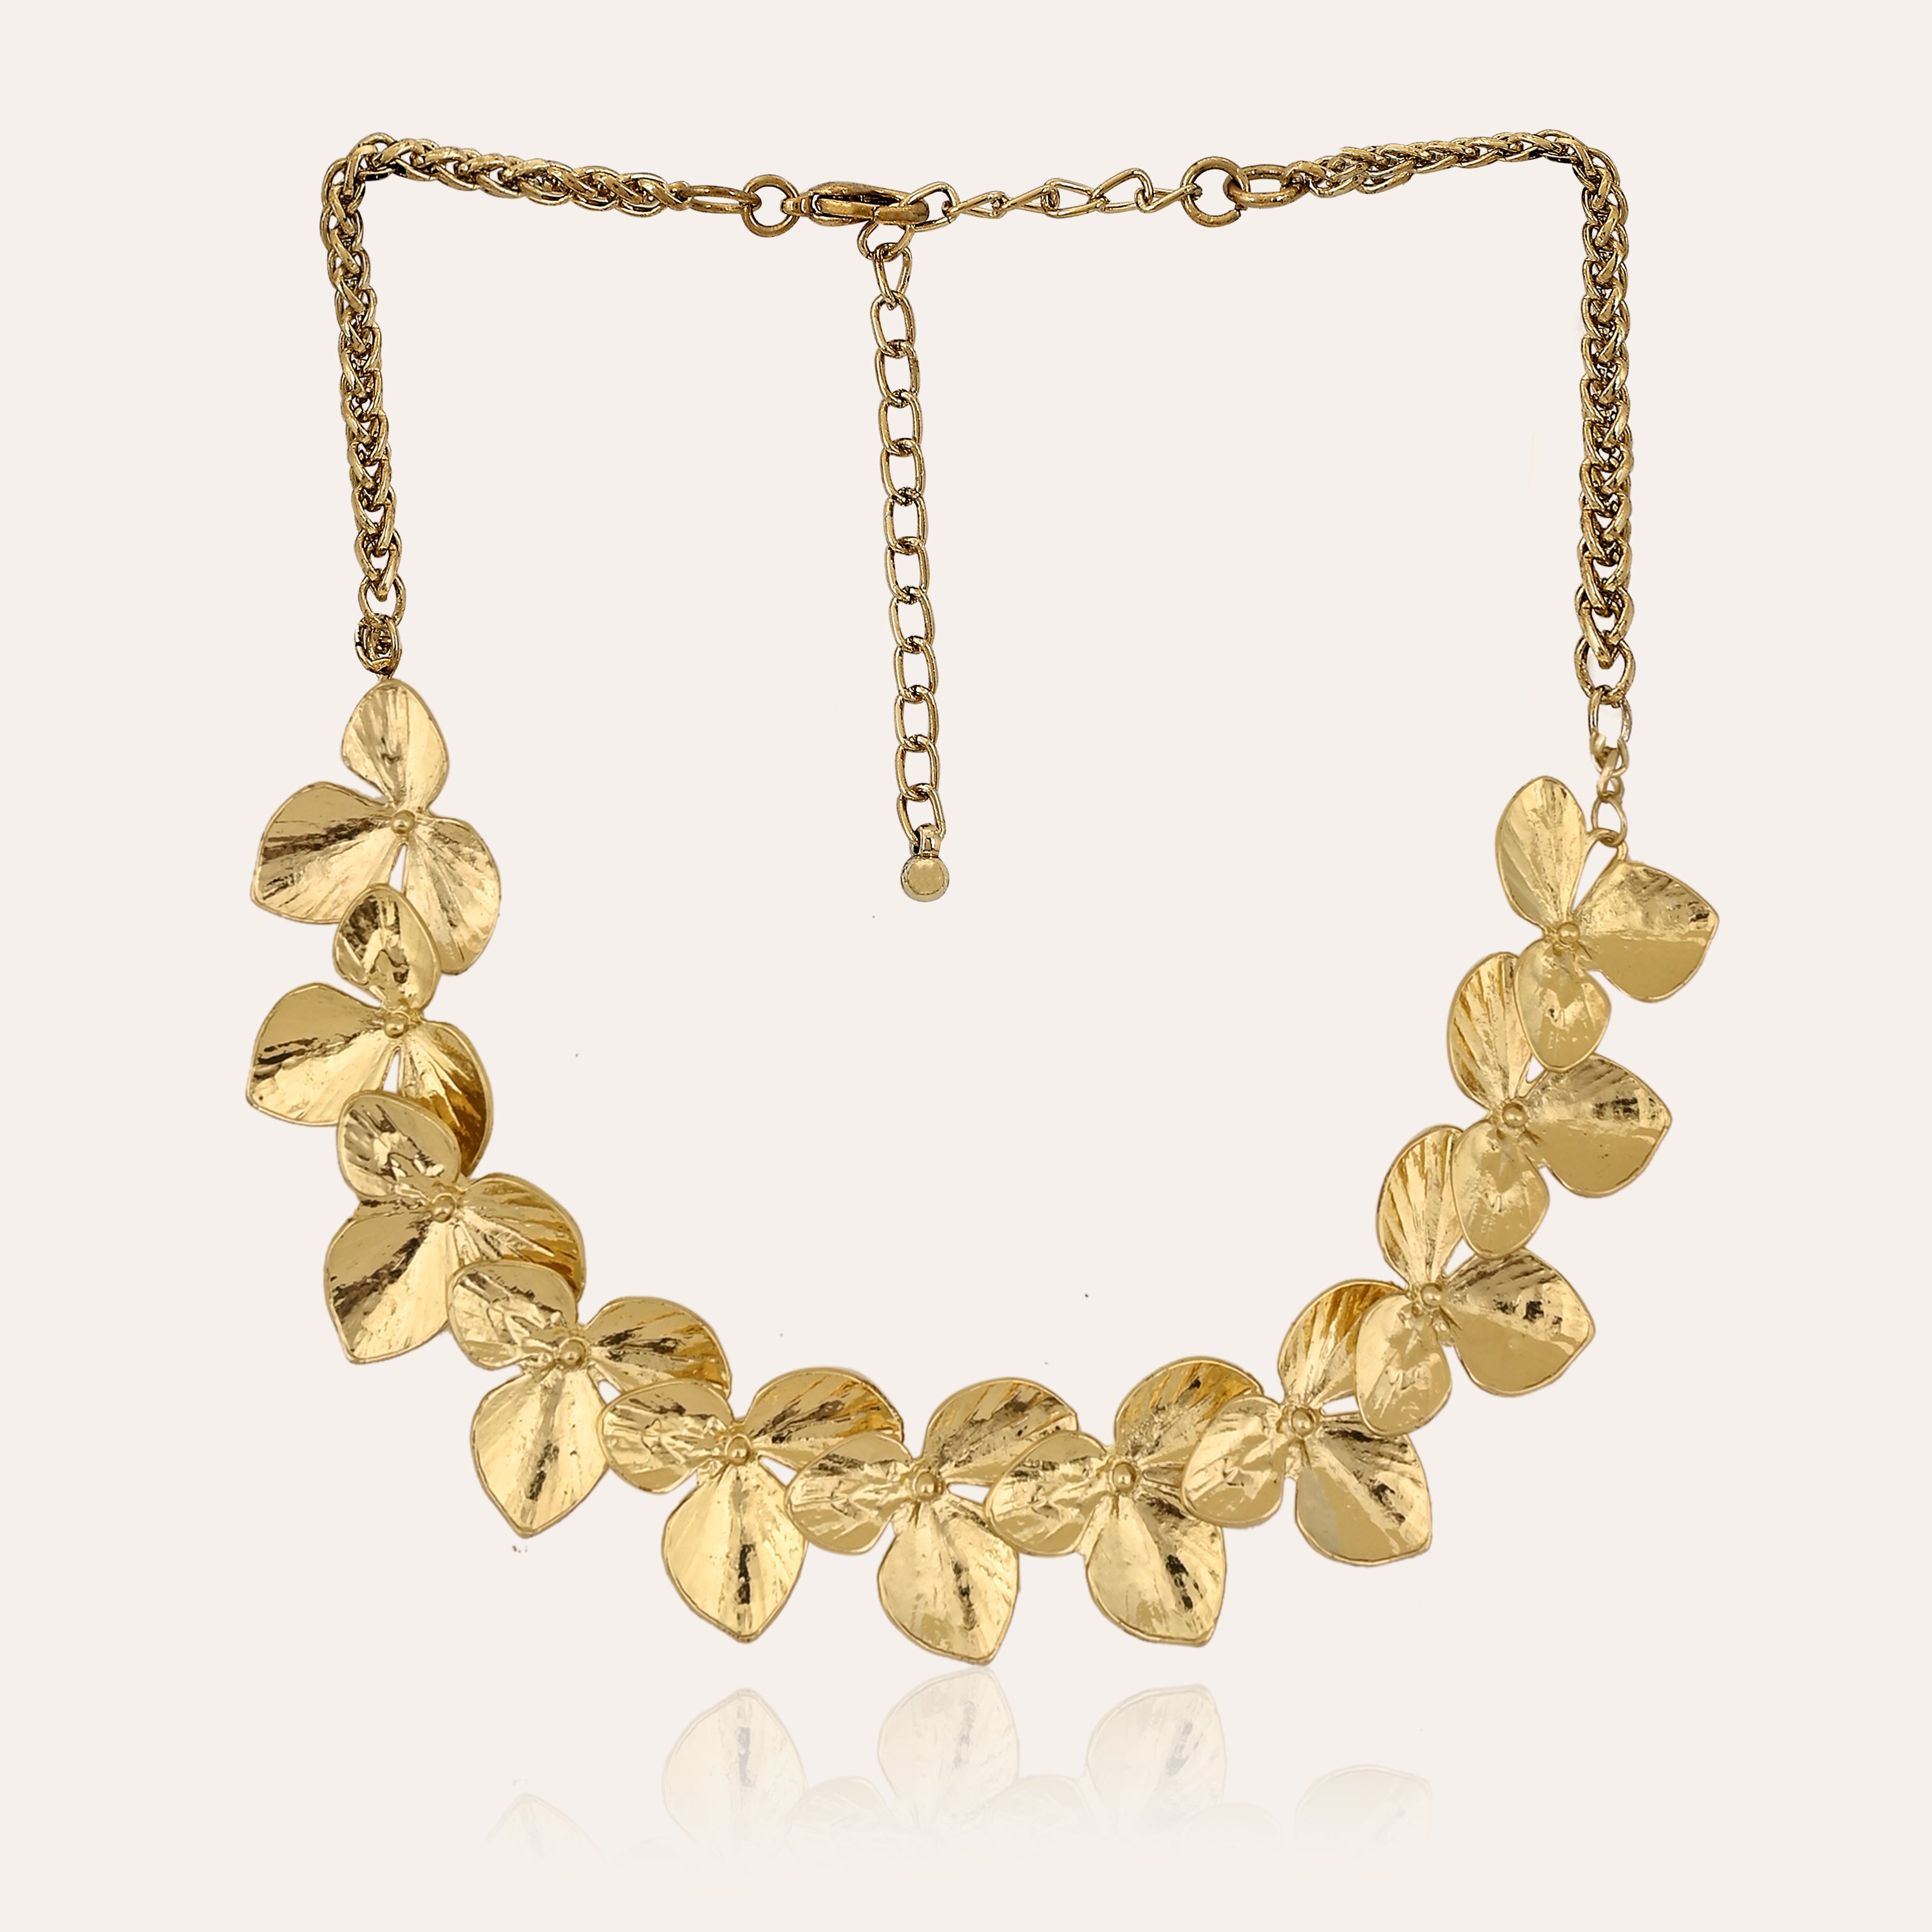 TFC Pretty Petal Gold Plated Necklace-Enhance your elegance with our collection of gold-plated necklaces for women. Choose from stunning pendant necklaces, chic choker necklaces, and trendy layered necklaces. Our sleek and dainty designs are both affordable and anti-tarnish, ensuring lasting beauty. Enjoy the cheapest fashion jewellery, lightweight and stylish- only at The Fun Company